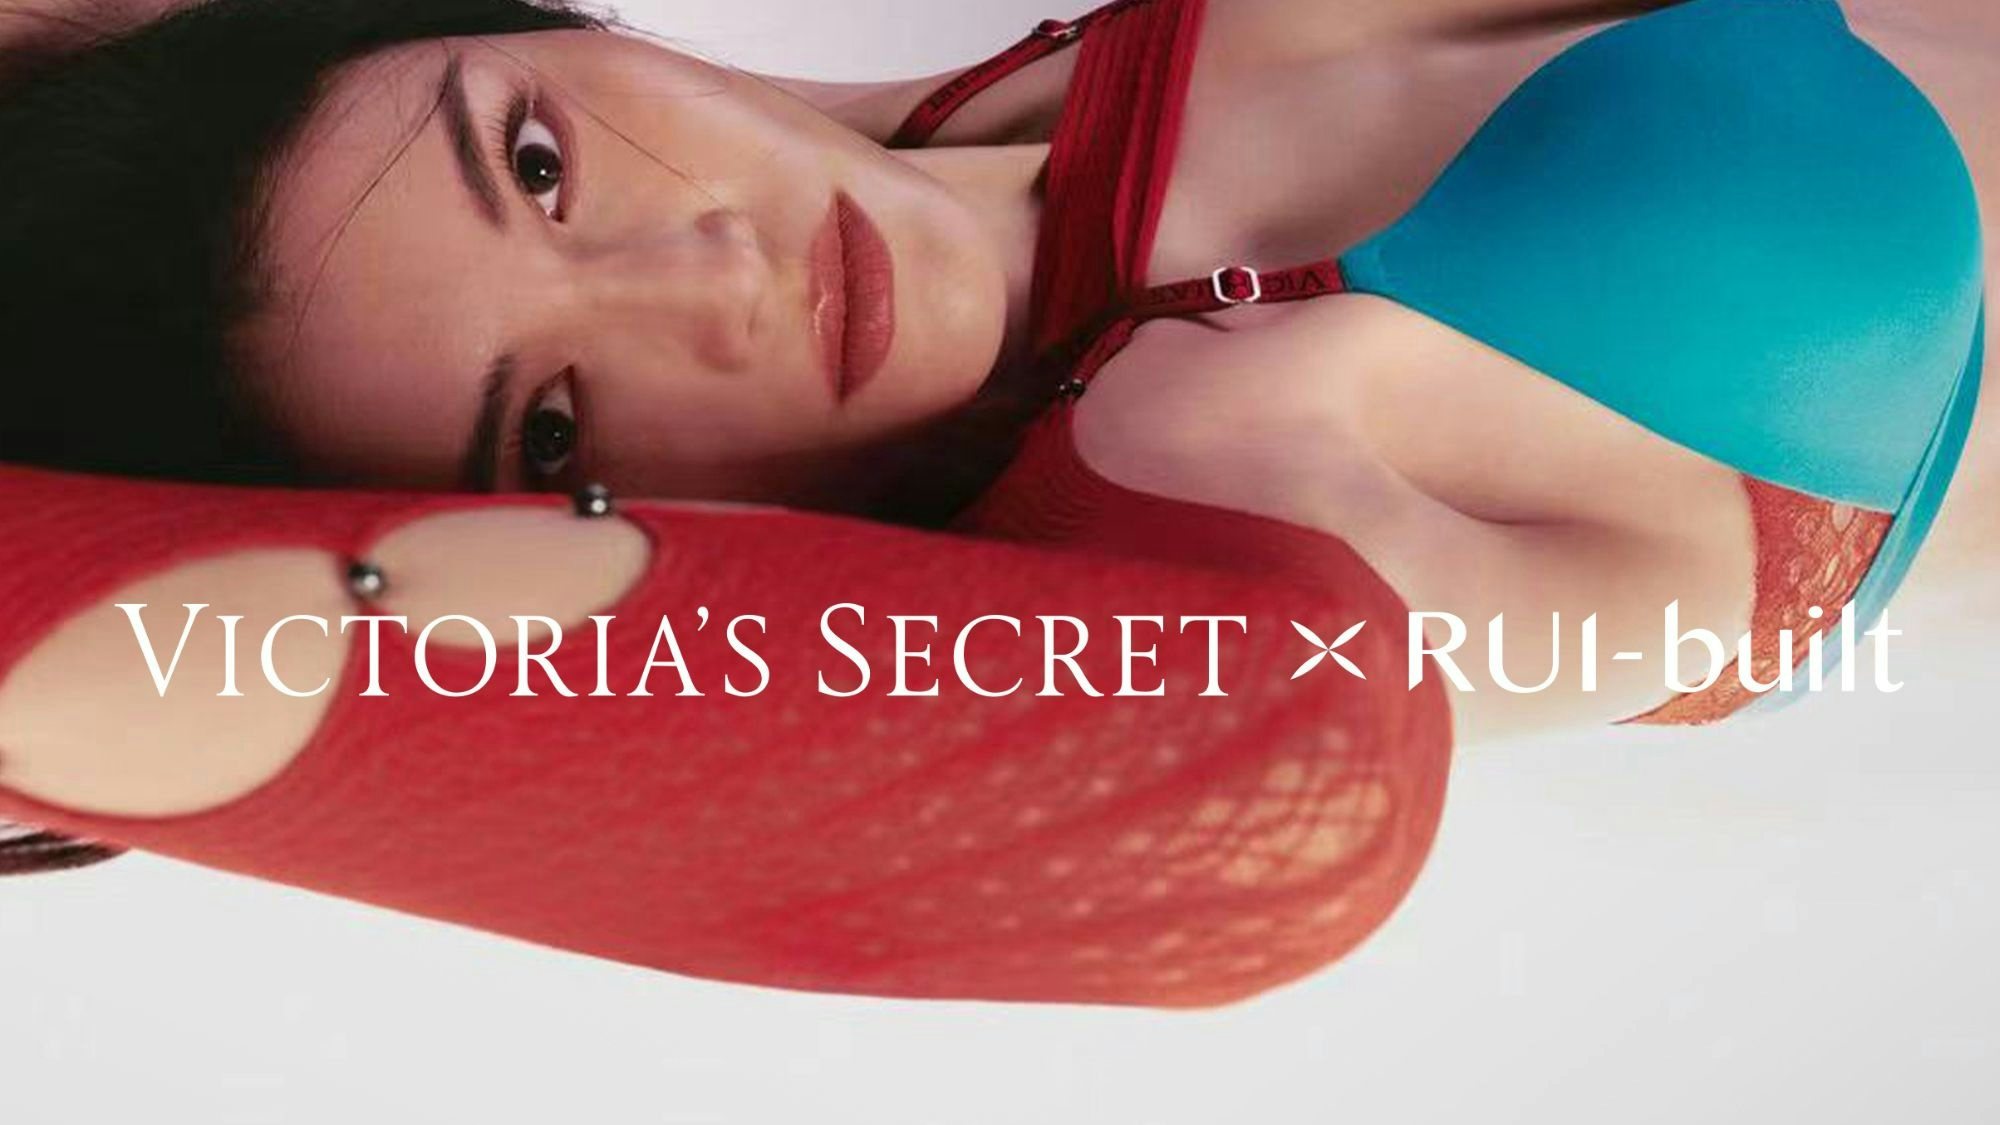 Inside Victoria's Secret's first Chinese collaboration, with Rui Zhou: the  lingerie fashion giant teamed up with the LVMH award winner's genderfluid  label Rui-Built to create a bold new collection